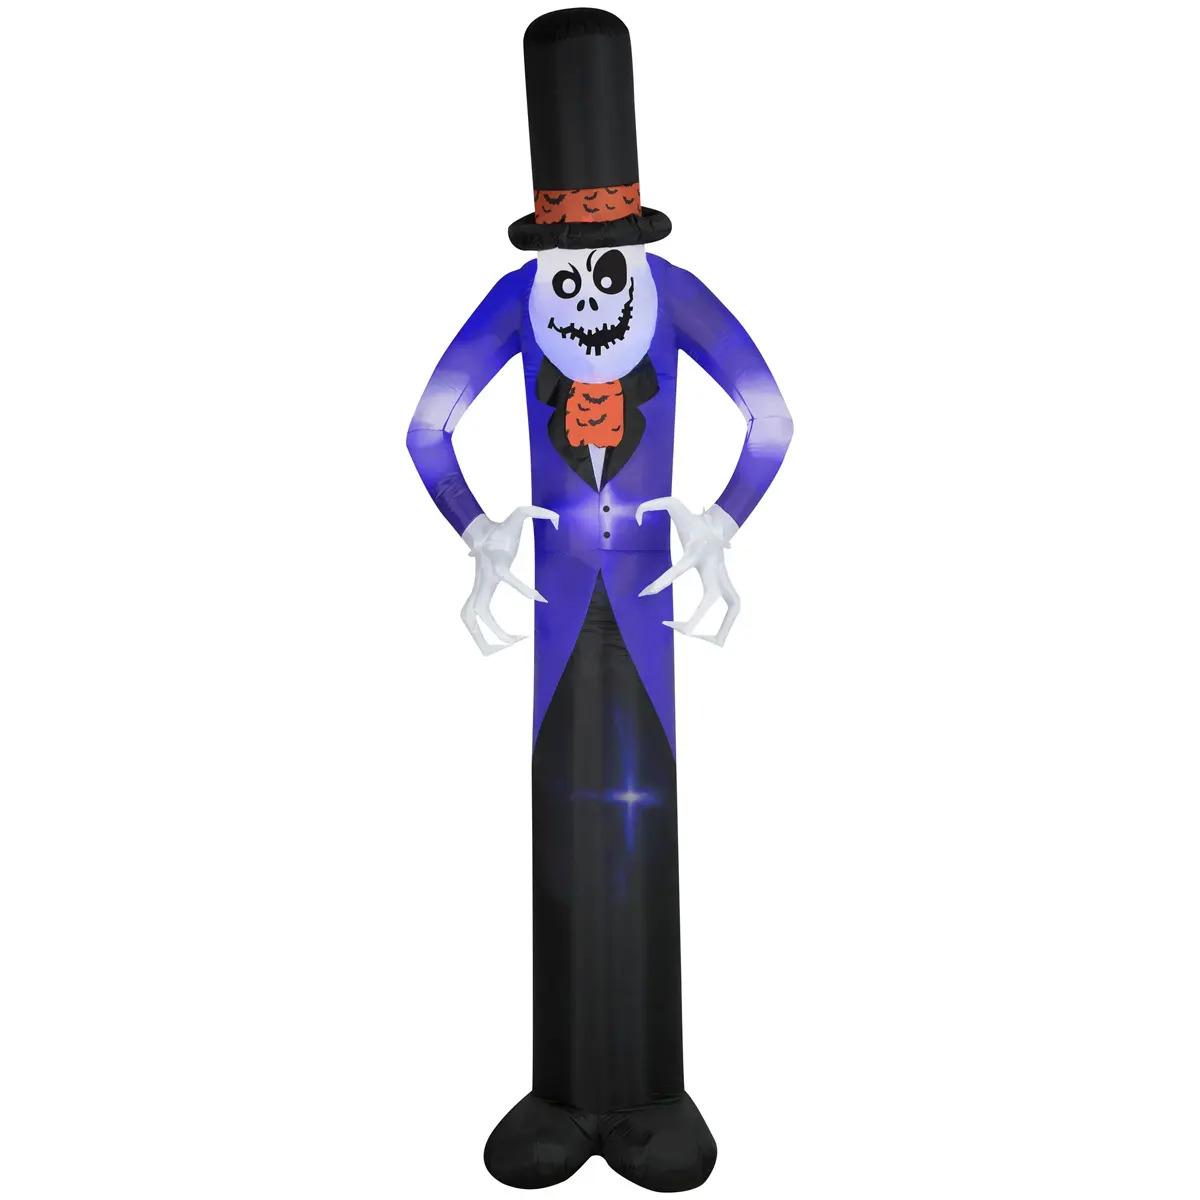 Airblown Inflatables Halloween Skeleton Creature with Hat for $39.50 Shipped